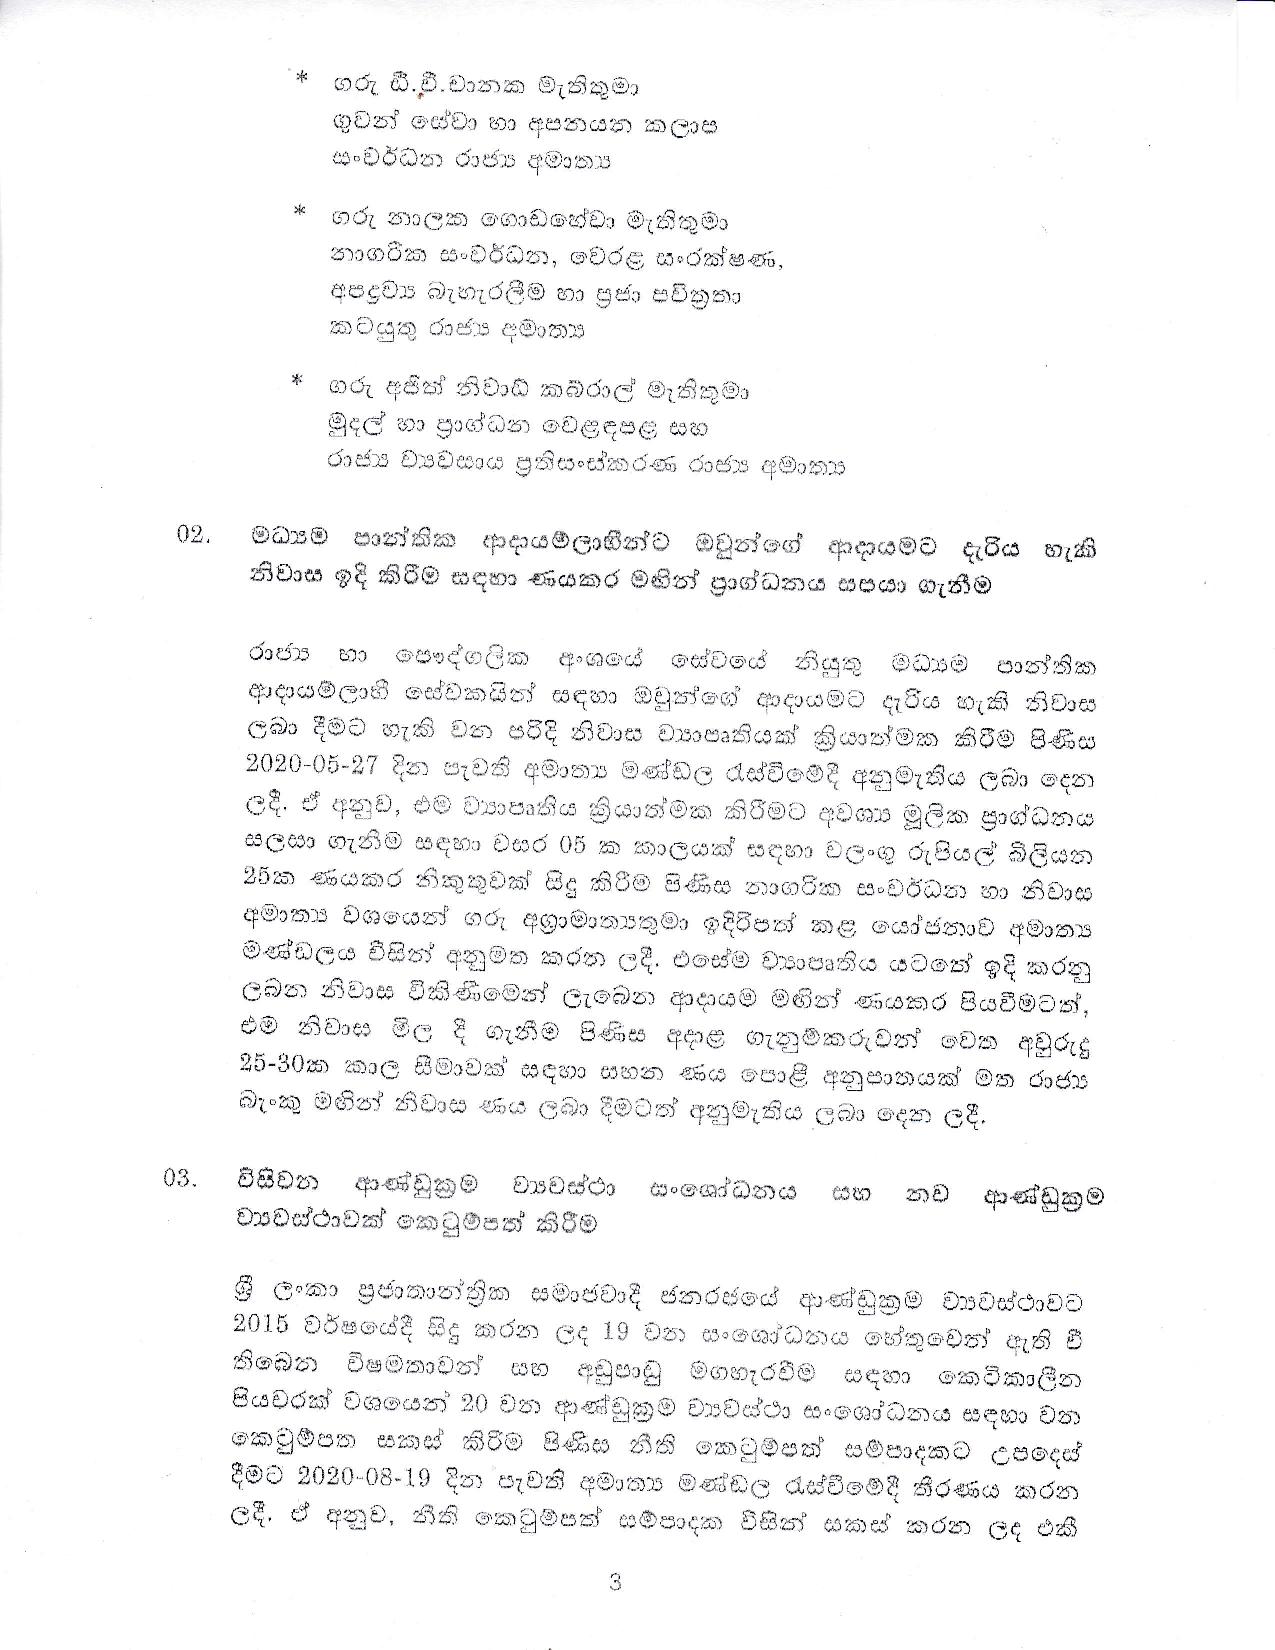 Cabinet decision on 02.09.2020 page 003